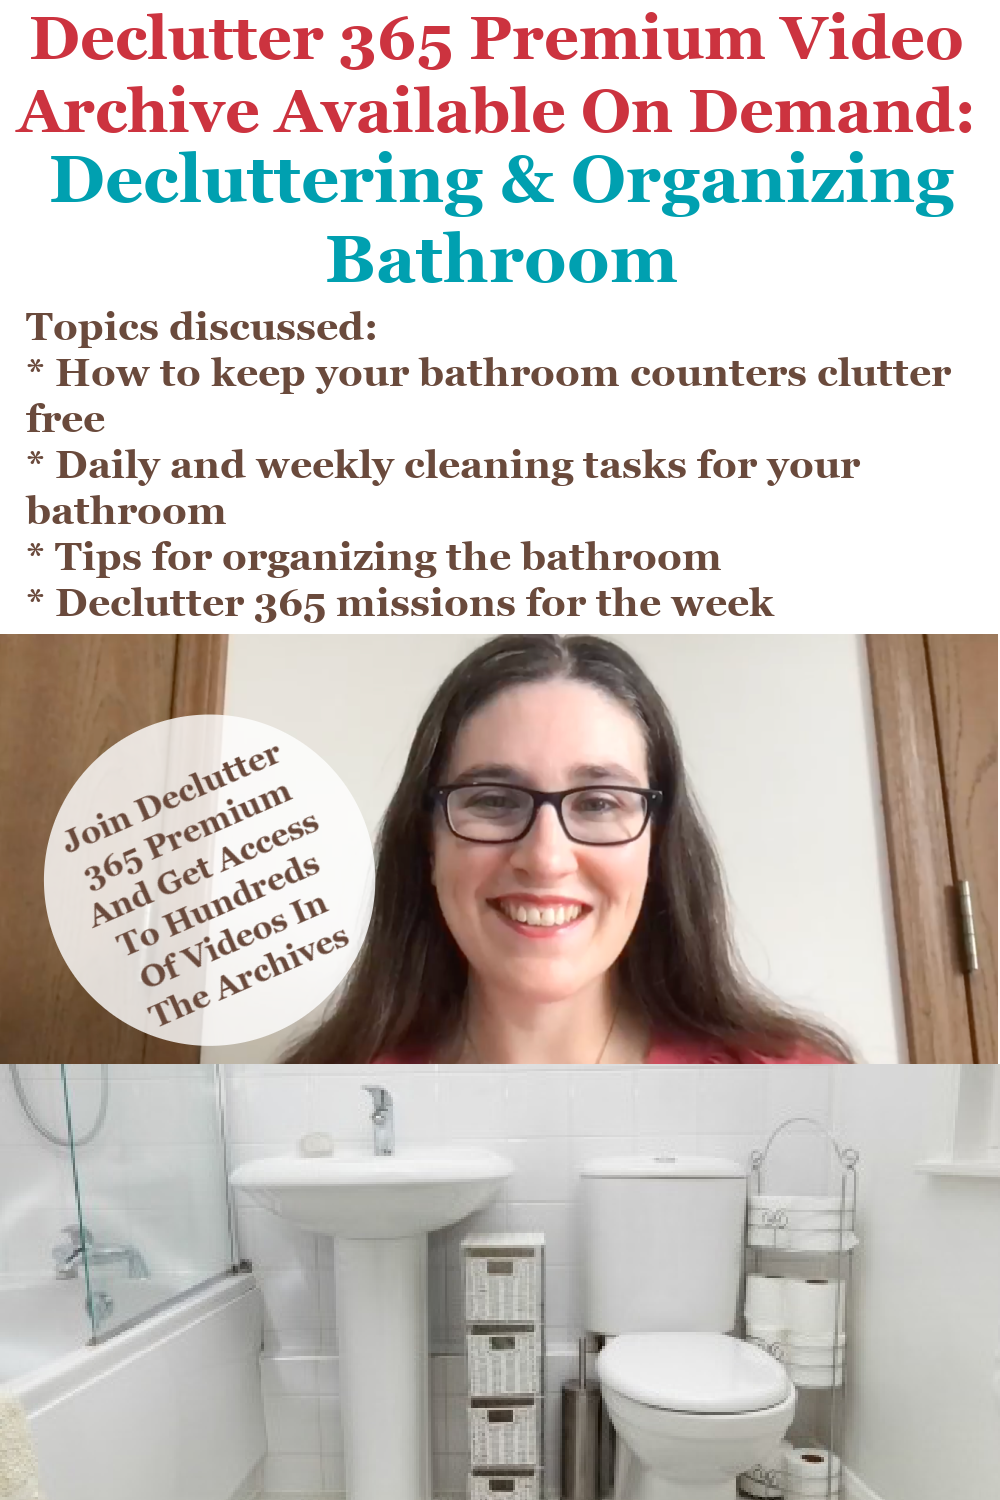 Declutter 365 Premium video archive available on demand all about decluttering and organizing your bathroom, on Home Storage Solutions 101